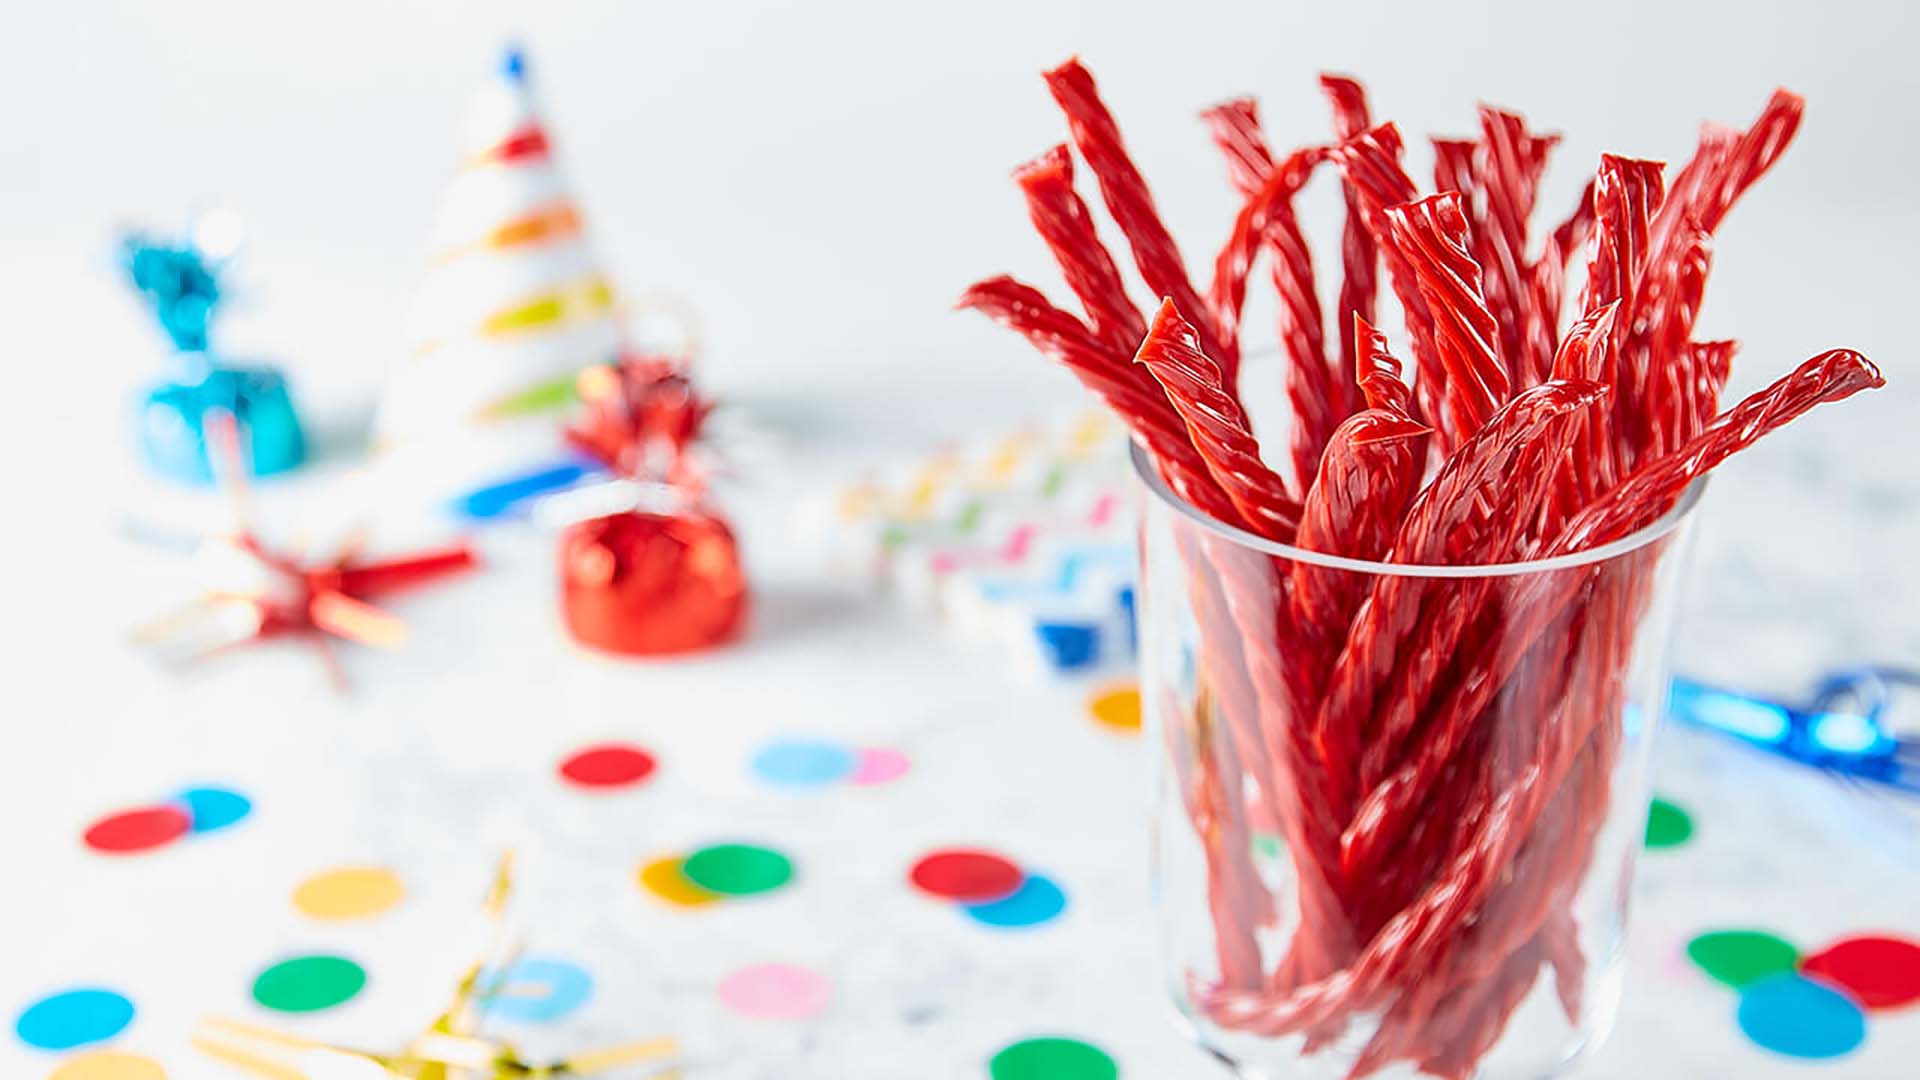 twizzlers strawberry twists inside glass cup surrounded by party decorations